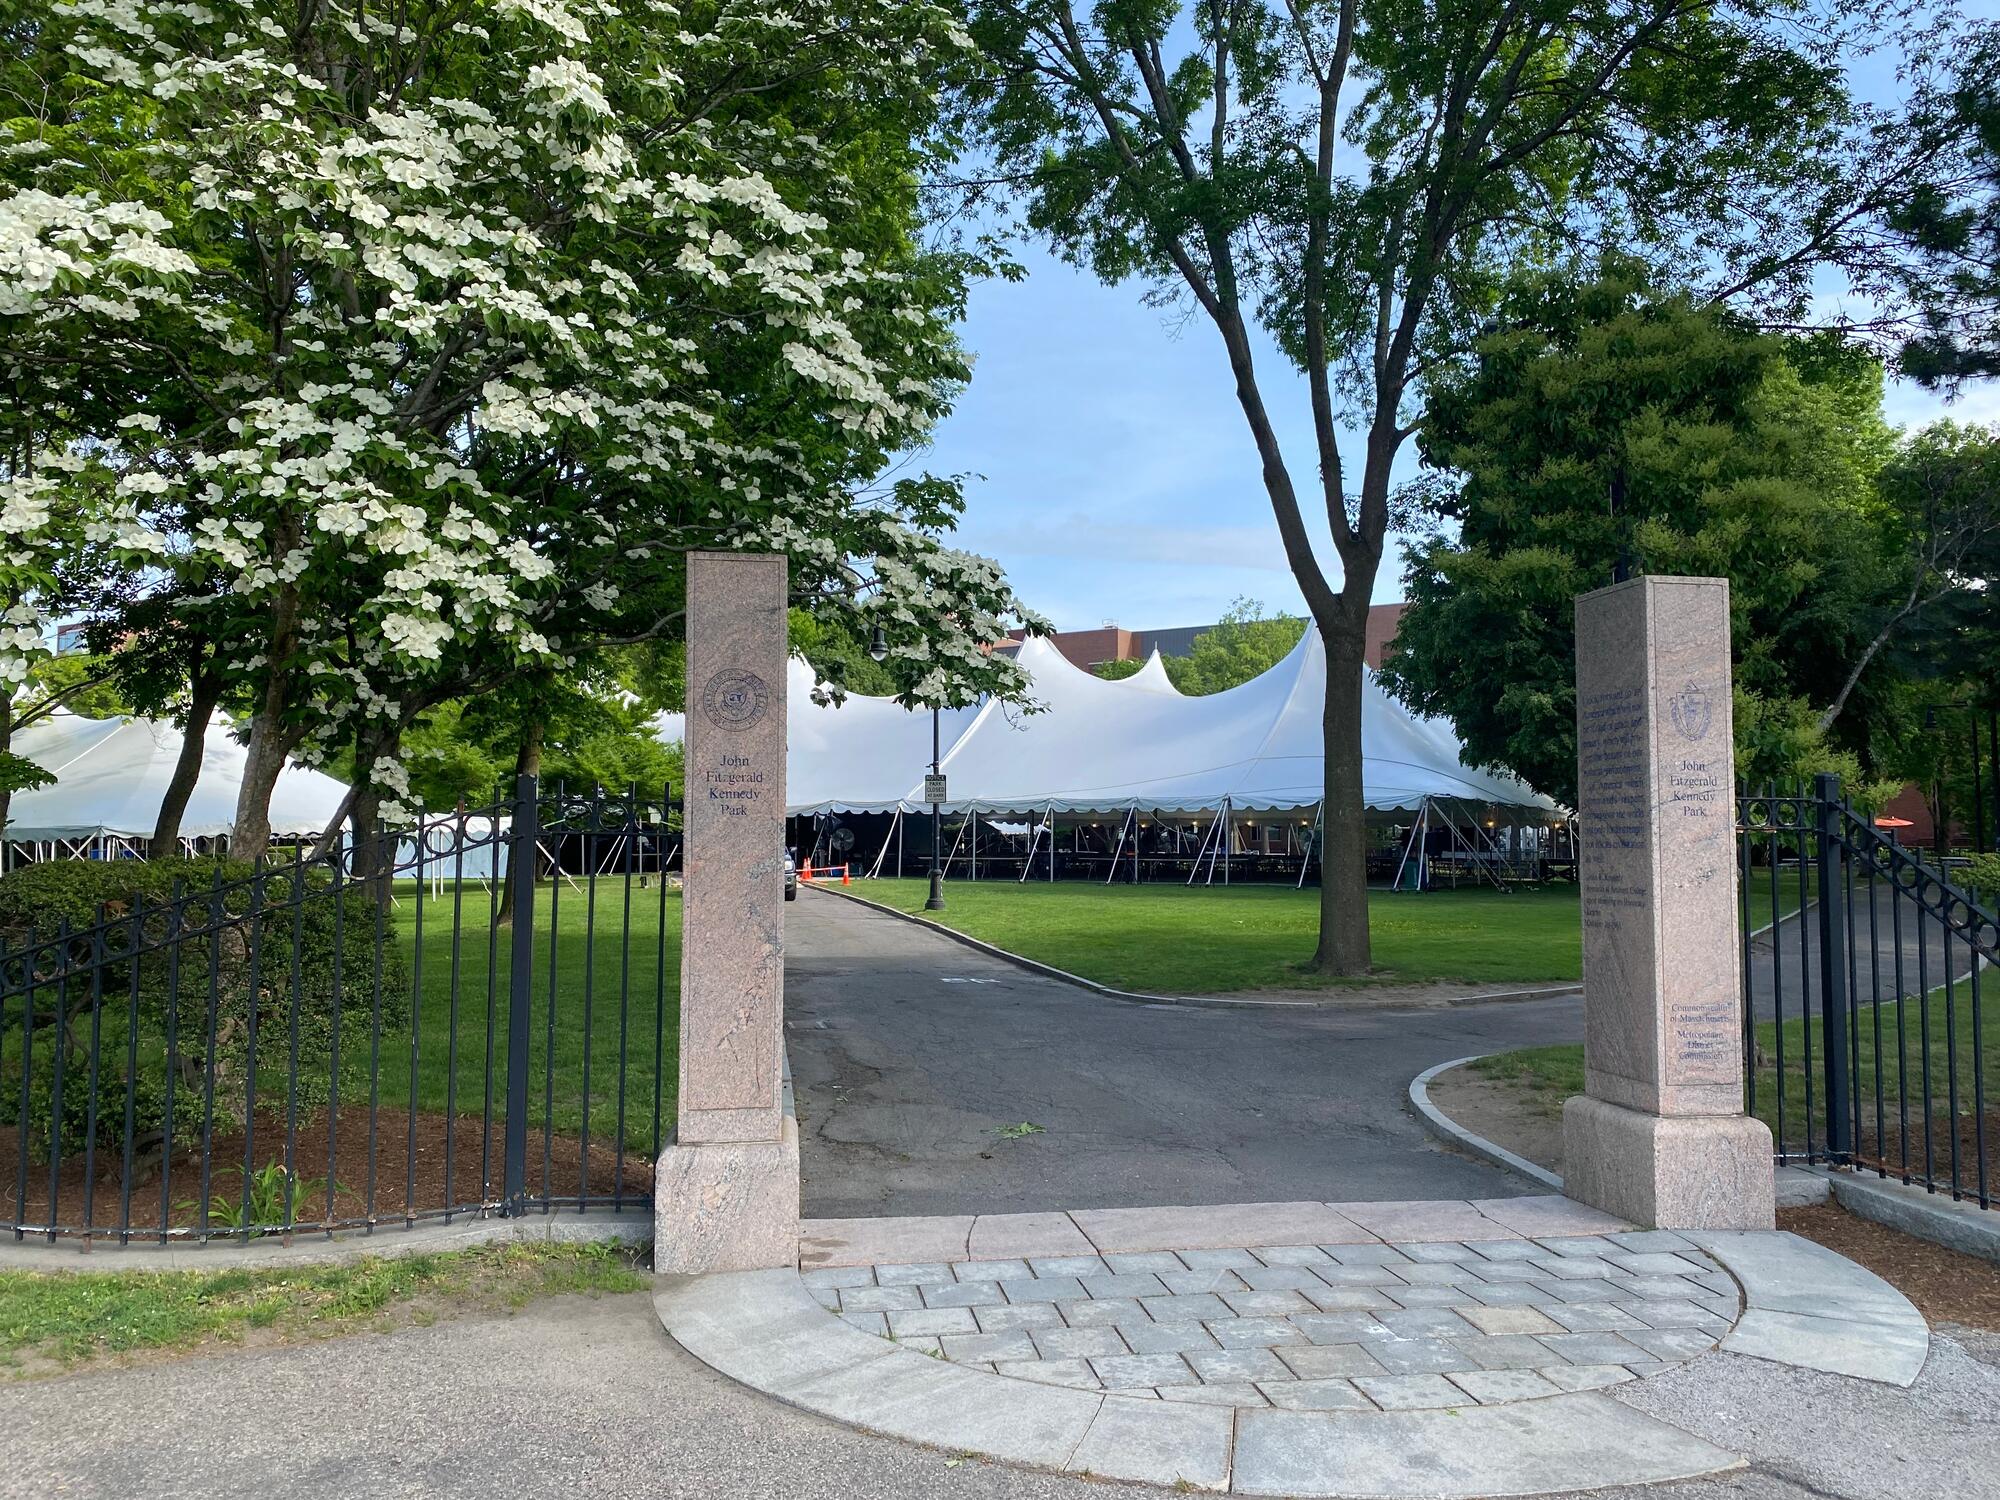 The Kennedy School graduate tent is visible between the entrance to JFK Memorial Park